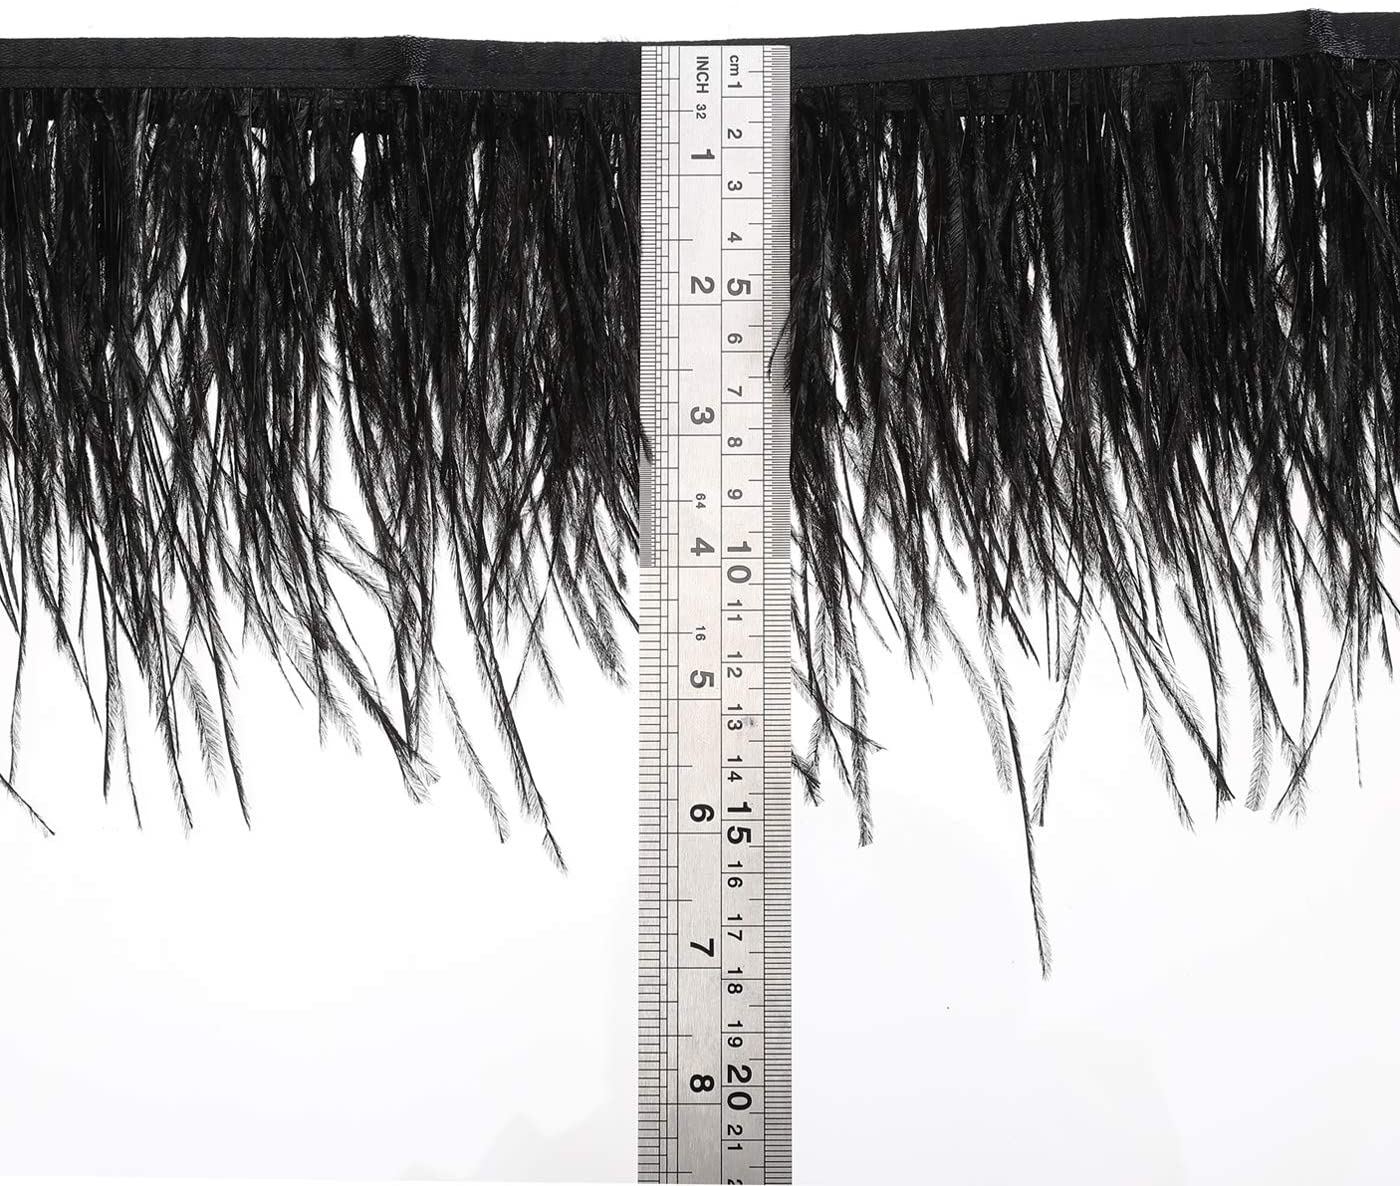 Lanshi Ostrich Feathers Trims Fringe with Satin Ribbon Tape for Dress Sewing Crafts Costumes Decoration Pack of 2 Yards (Black)